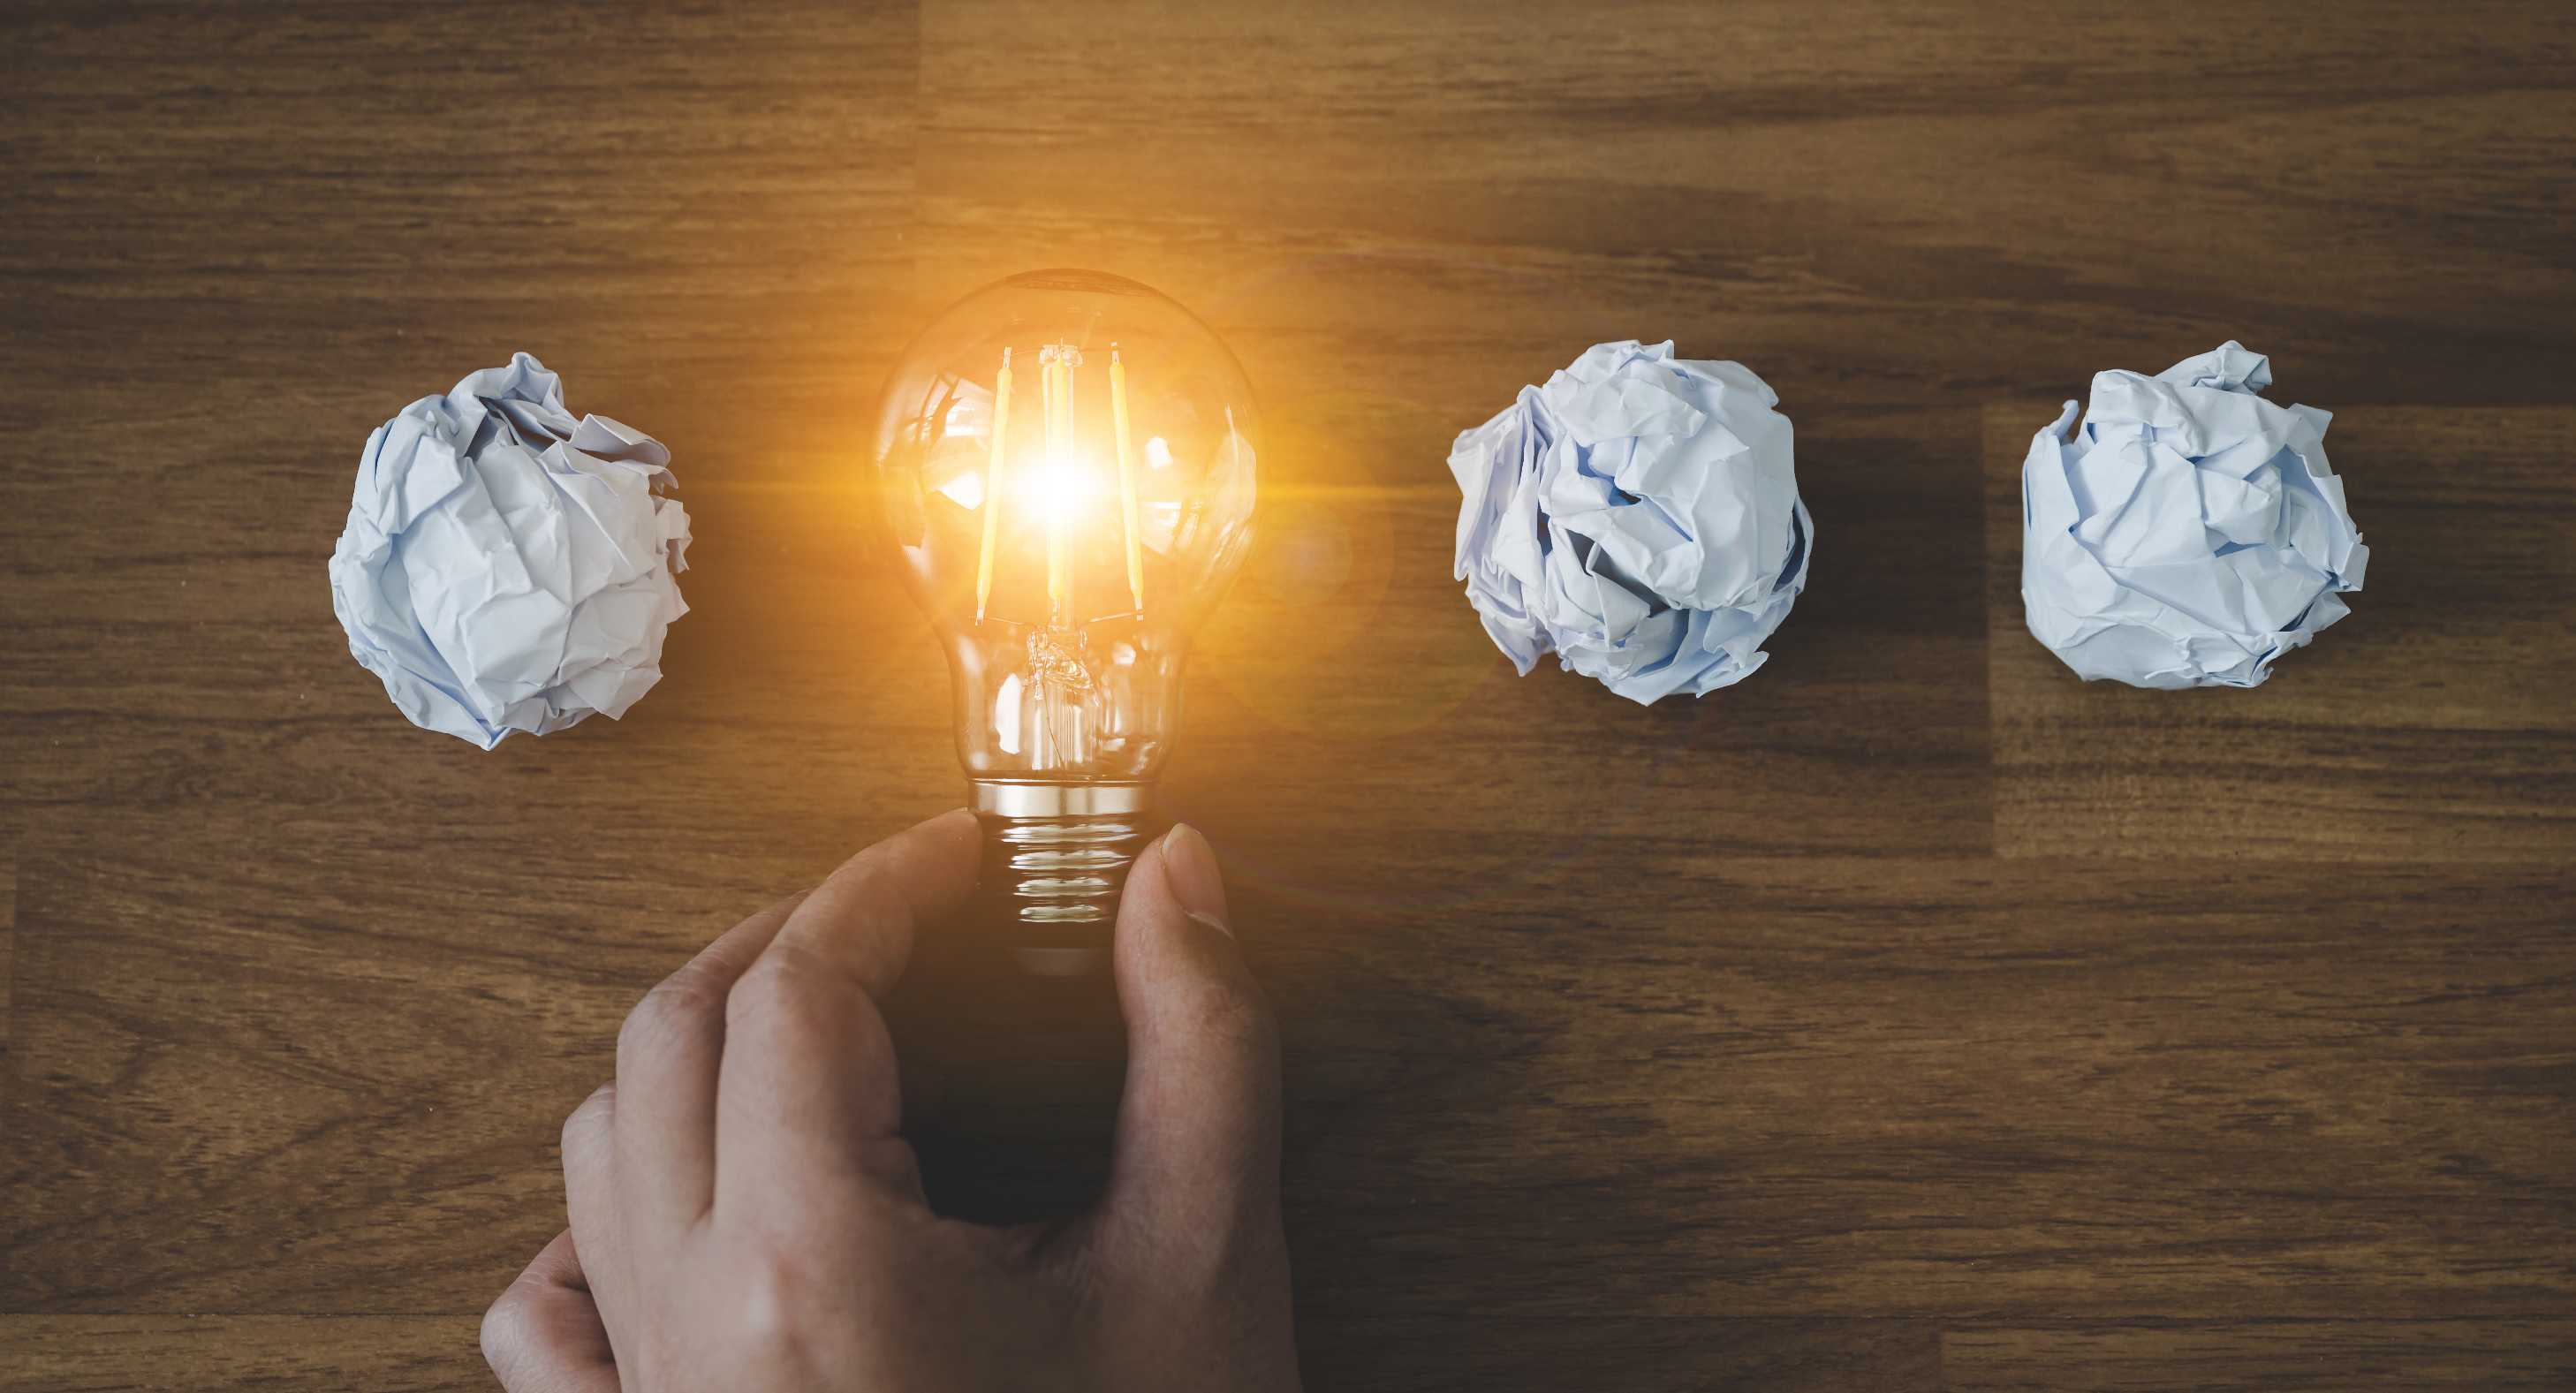 Getting your business idea out of your head